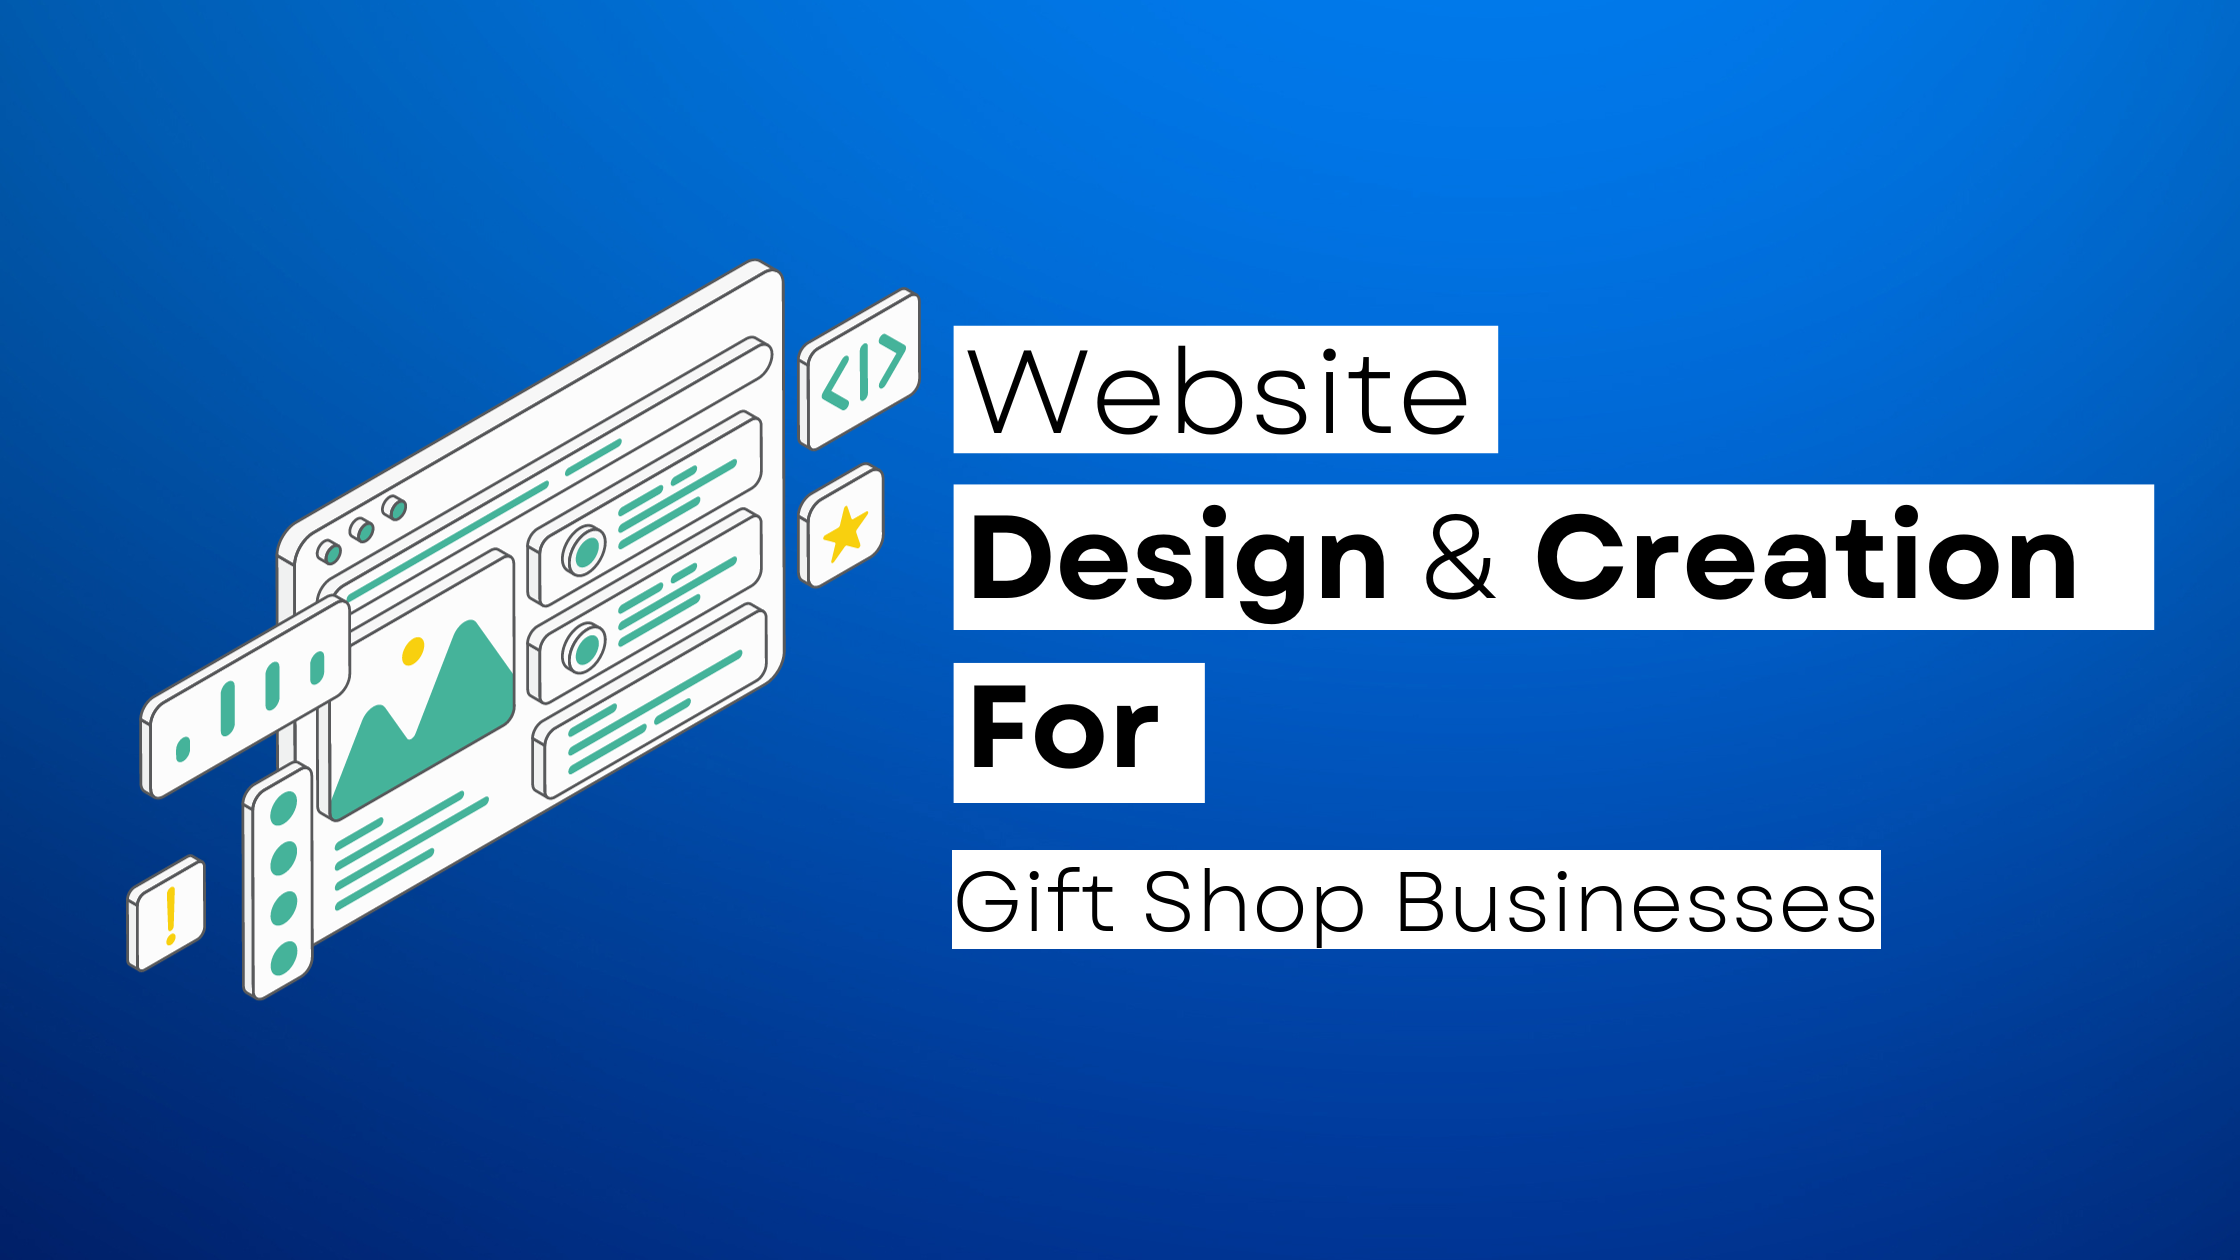 How to start a Gift Shop website